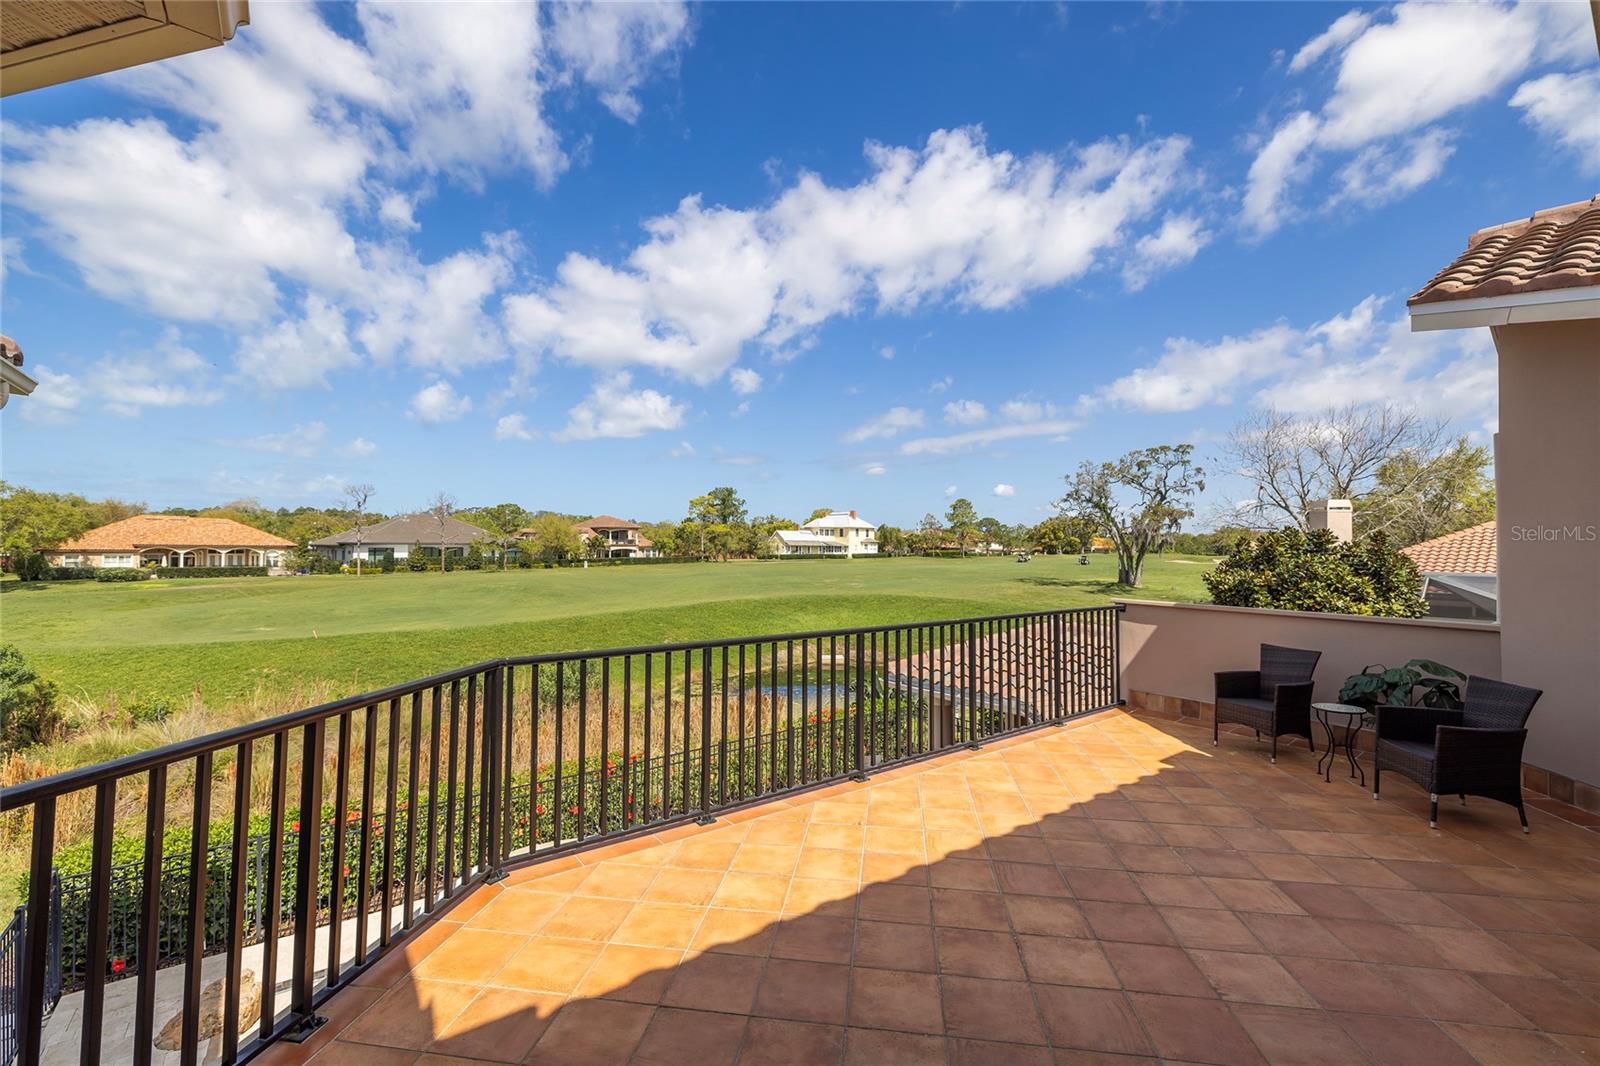 Enjoy views of the 10th fairway of the Osprey South golf course.